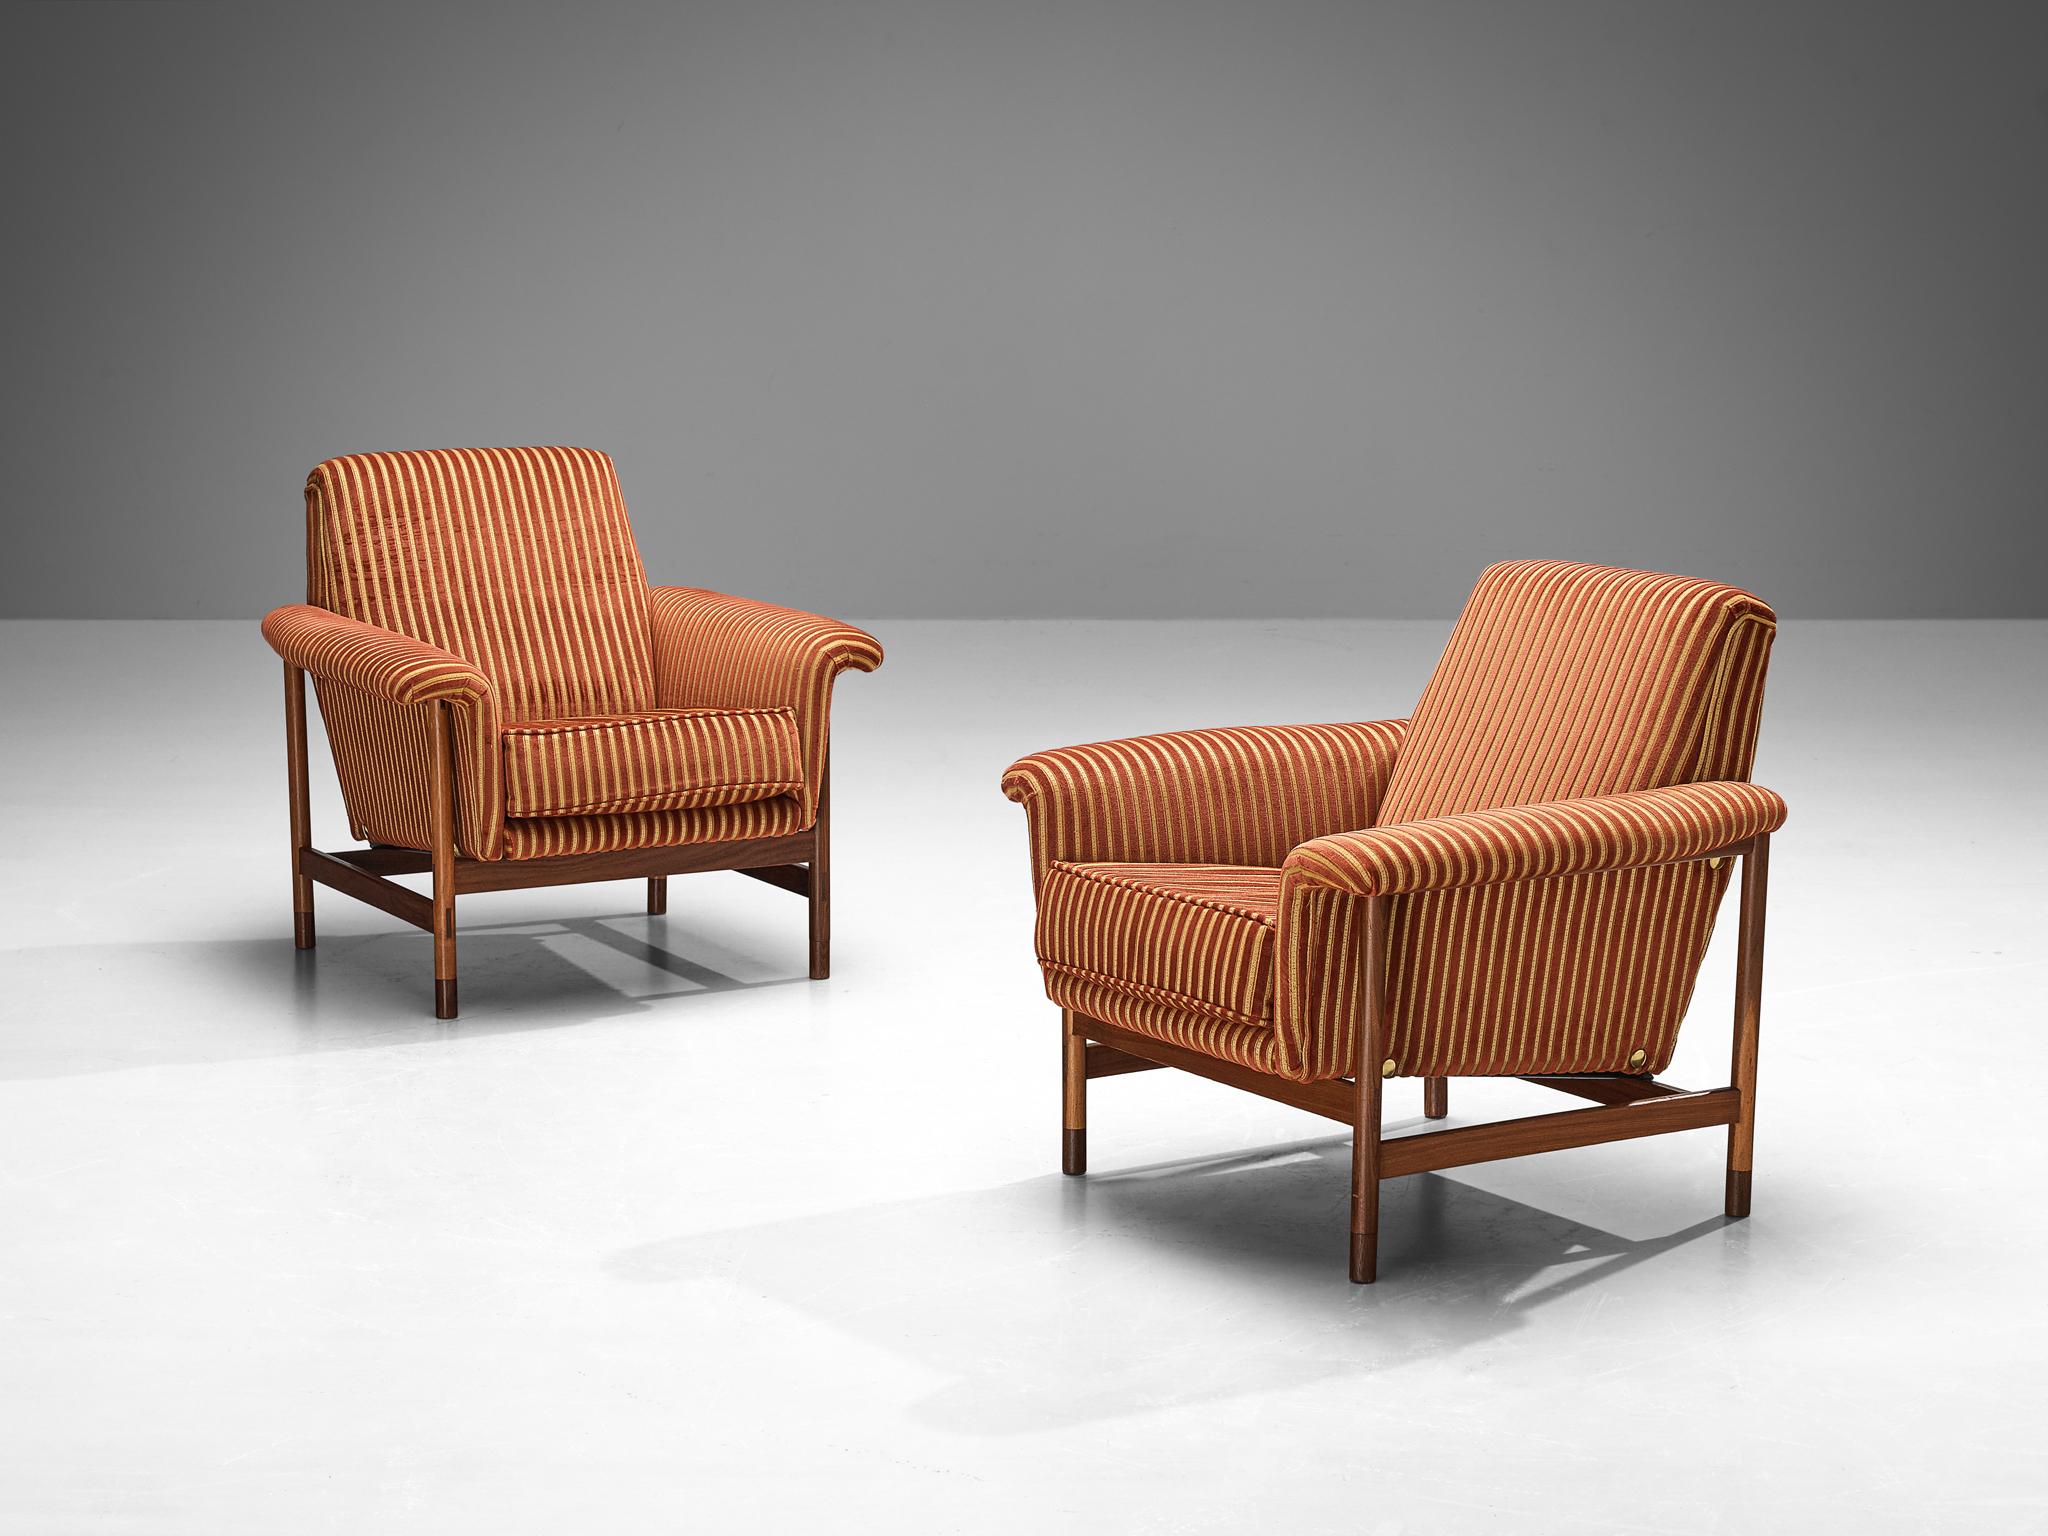 Pair of lounge chairs, teak, wood, fabric, Italy, 1960s

A pair of lounge chairs from the vibrant 1960s. These Italian easy chairs breathe elegance and sophistication. Crafted with meticulous care, they show a captivating striped upholstery in bold